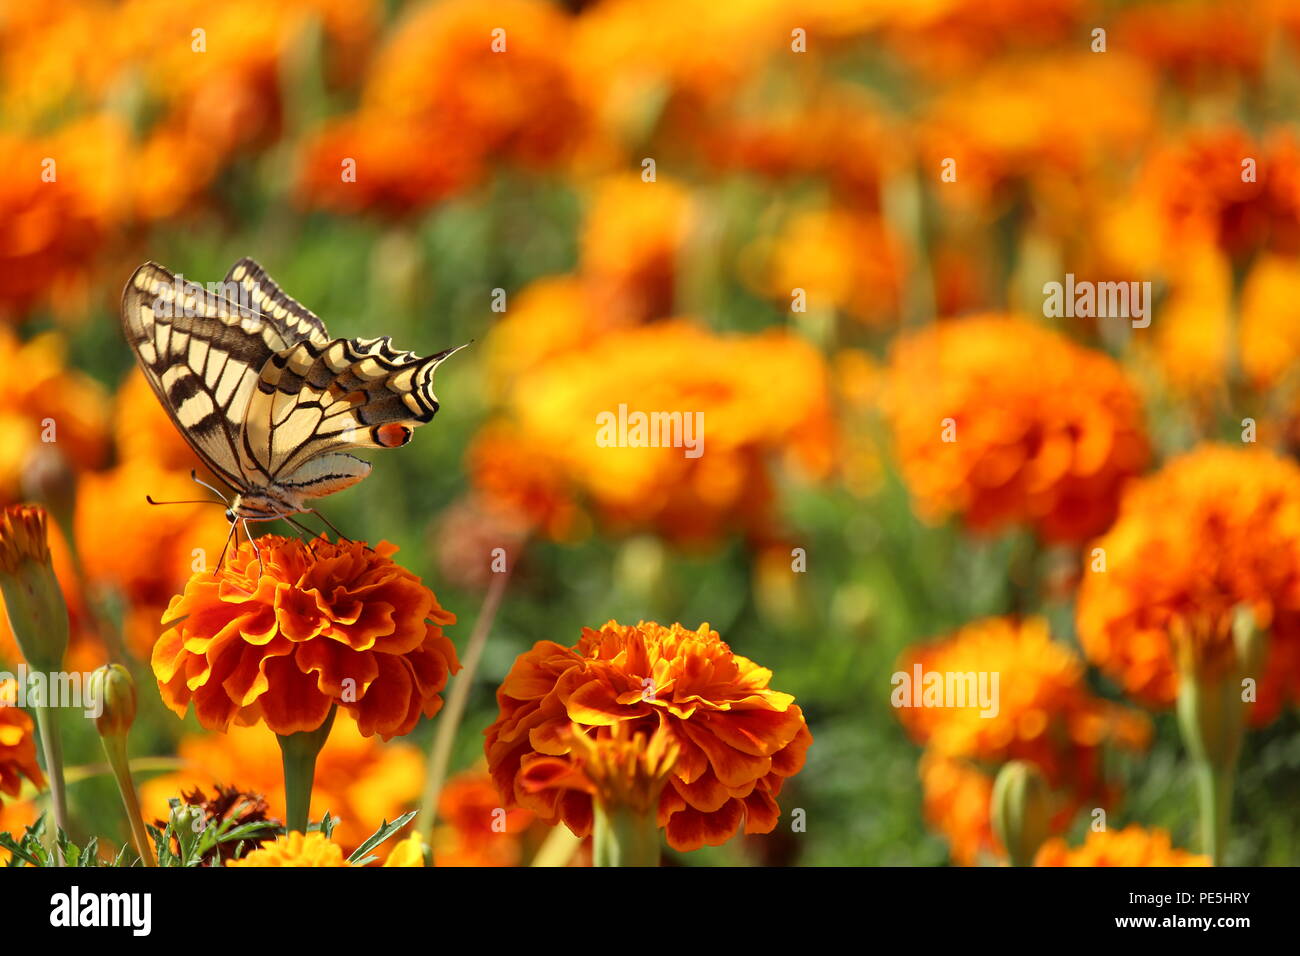 Yellow butterfly on flower, with field of carnations on background Stock Photo